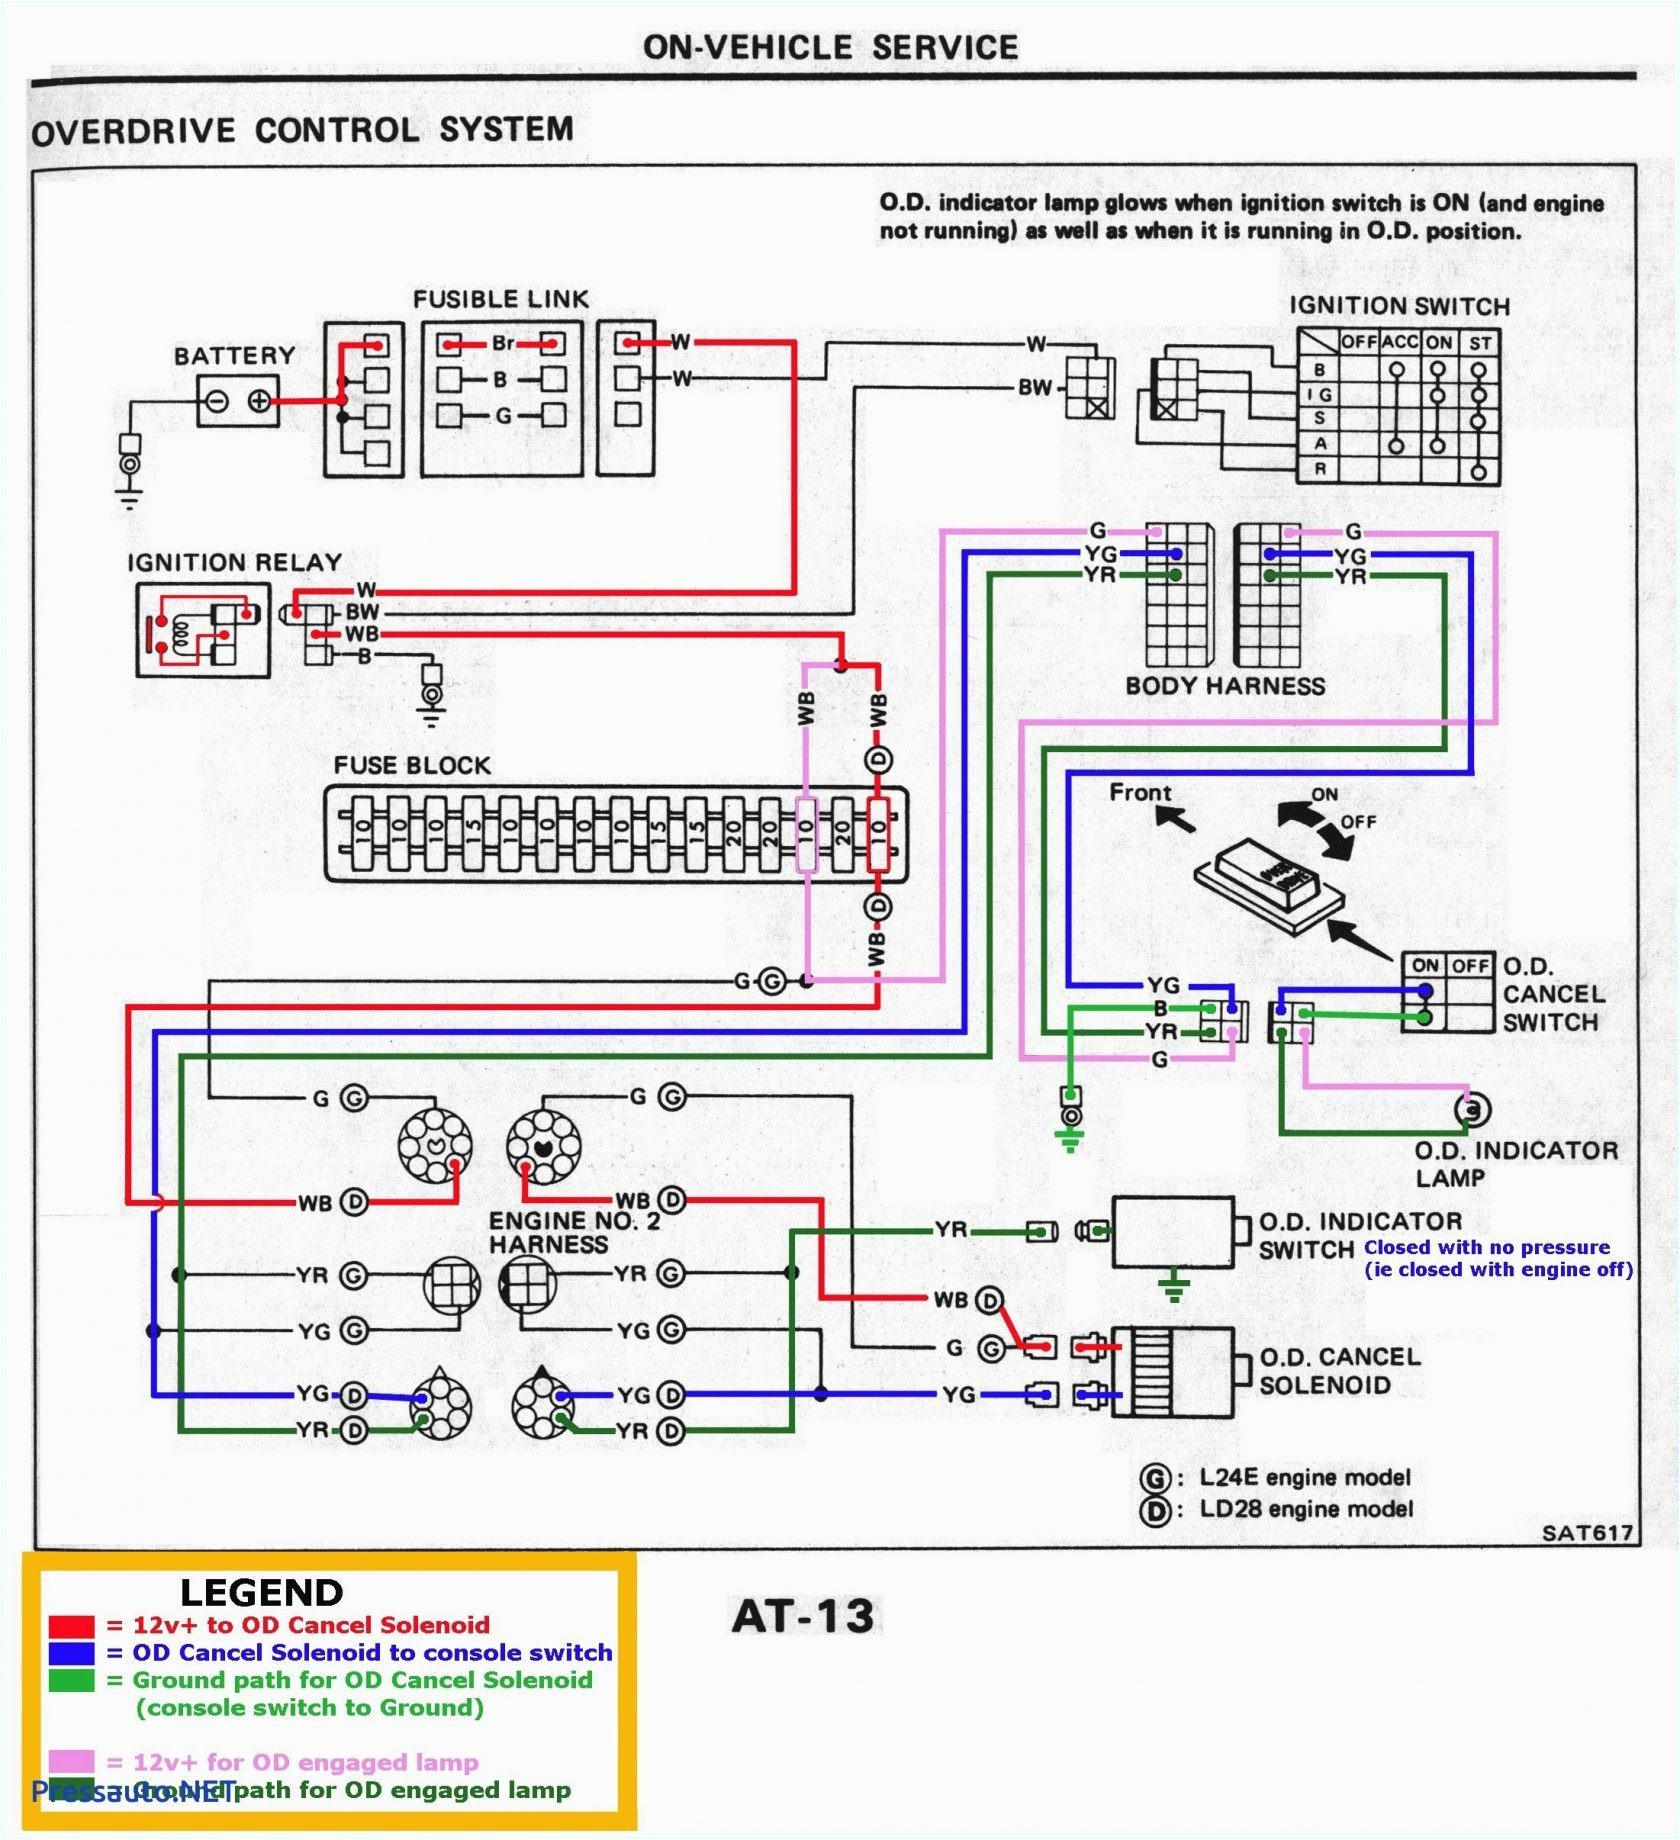 chevy wiring harness diagram for 66 6 cylinder wiring diagram 66 6 cylinder gm wiring harness